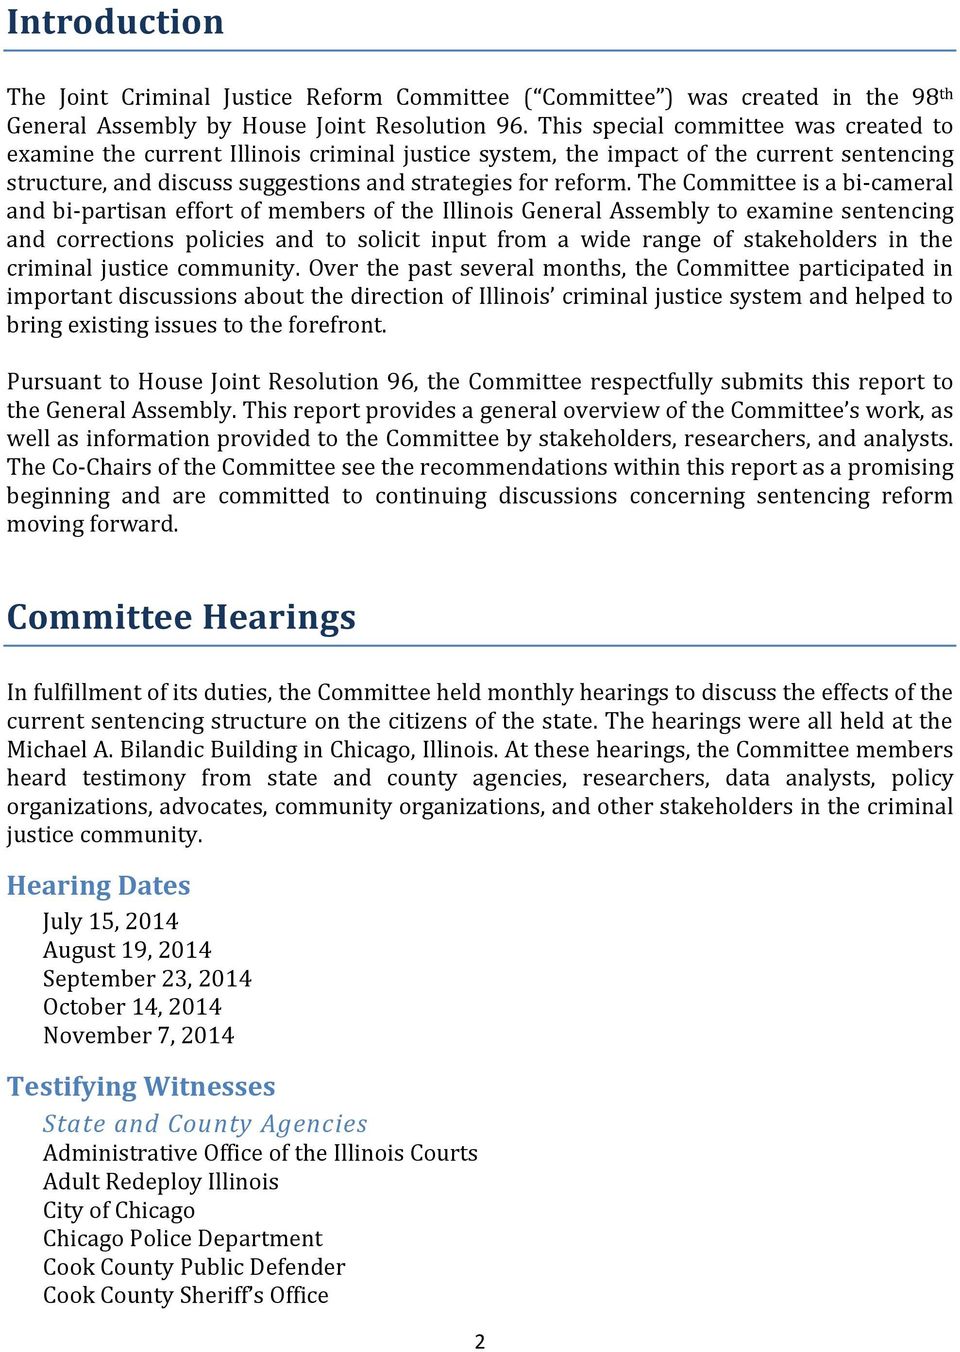 The Committee is a bi-cameral and bi-partisan effort of members of the Illinois General Assembly to examine sentencing and corrections policies and to solicit input from a wide range of stakeholders